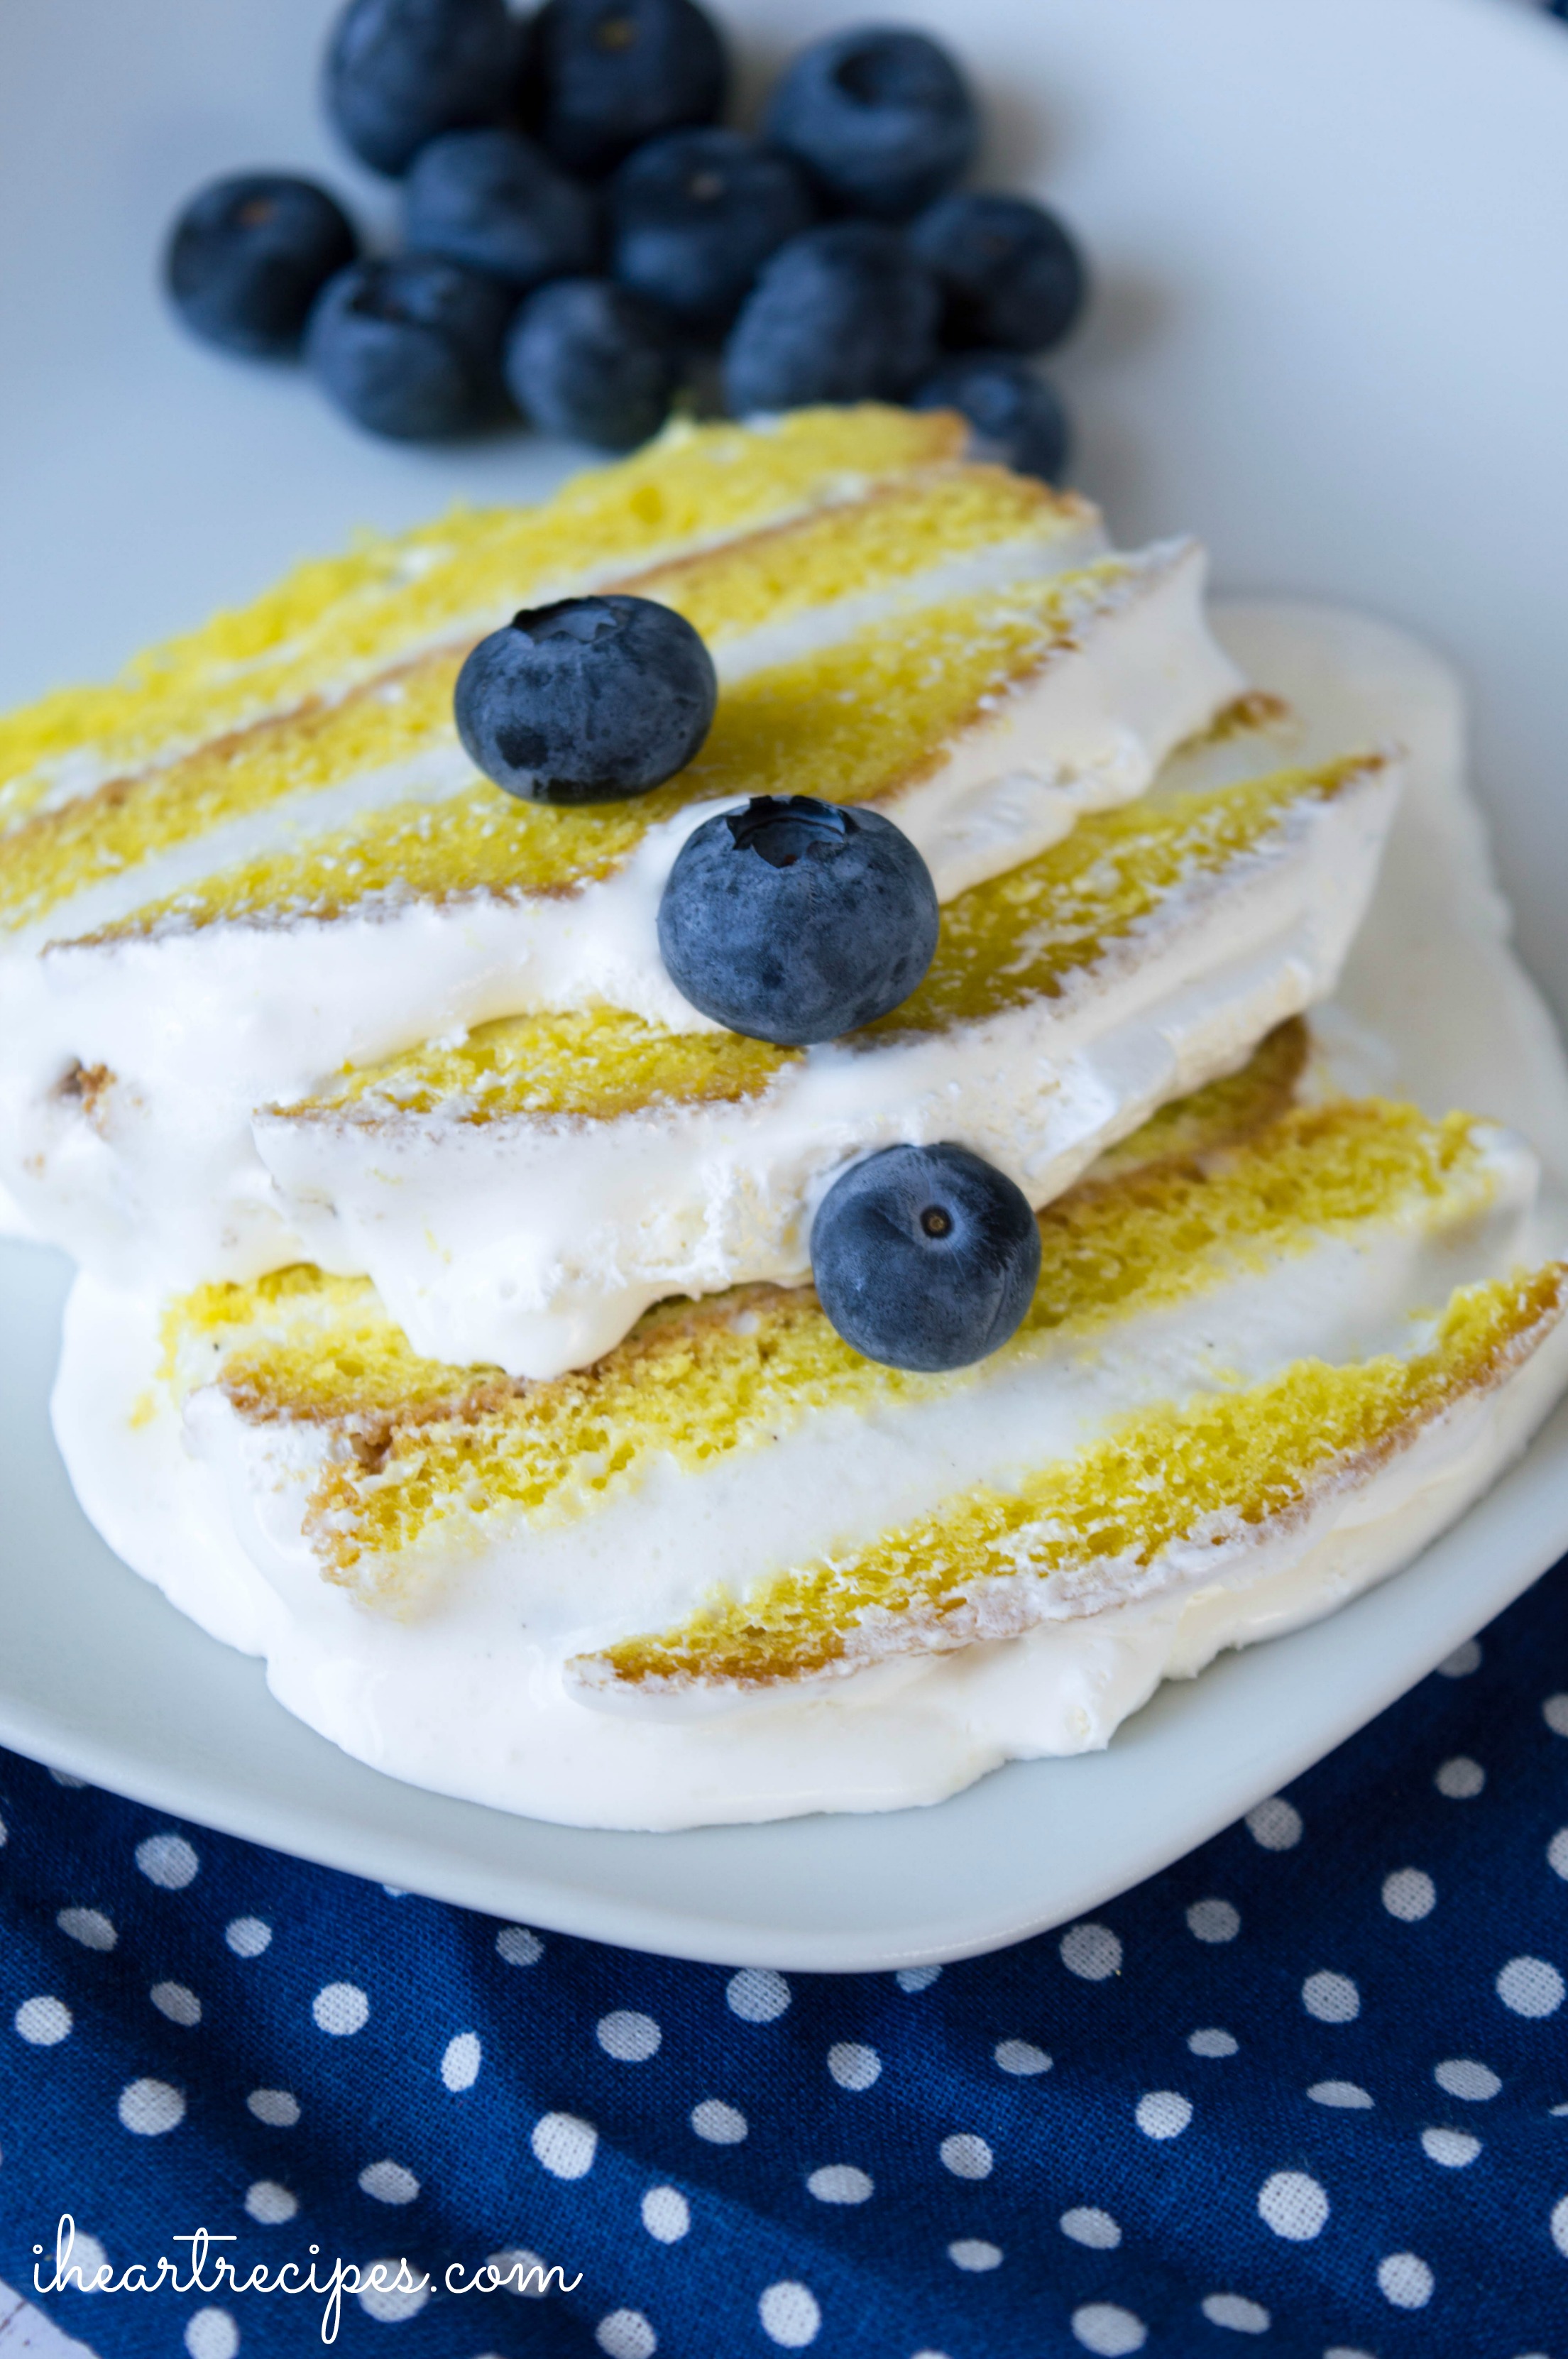 Light ice cream and a refreshing lemon cake make this a perfect summer treat